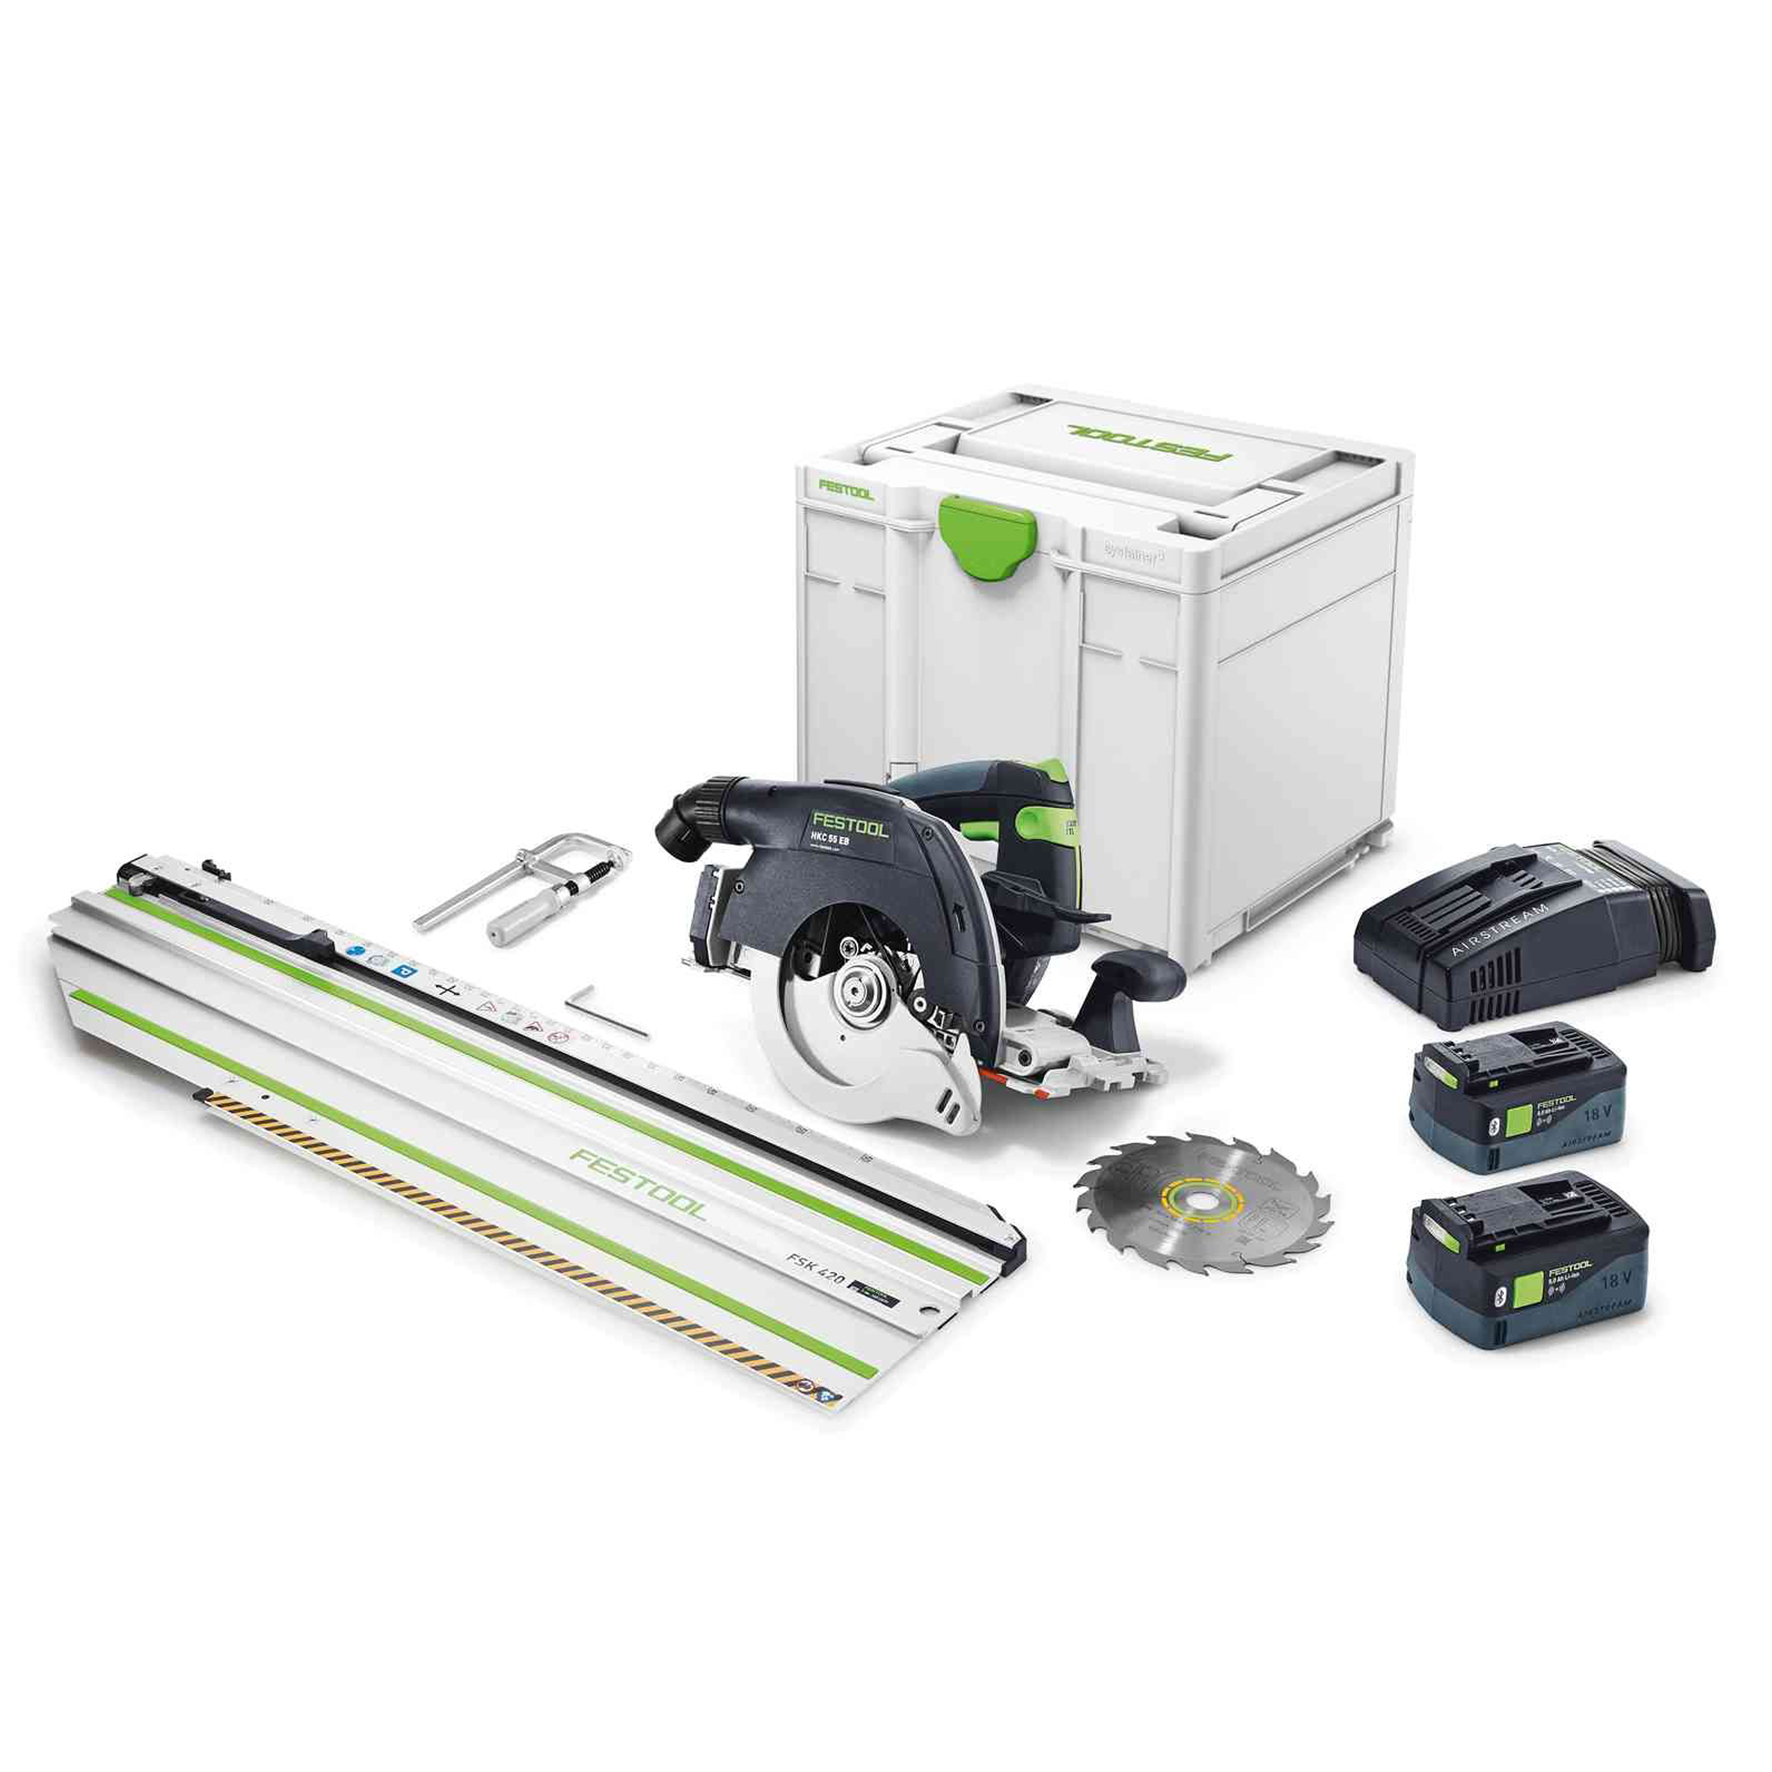 160mm 18V 5.0Ah Cordless Circular Saw Bluetooth Set in Systainer HKC 55 577675 by Festool